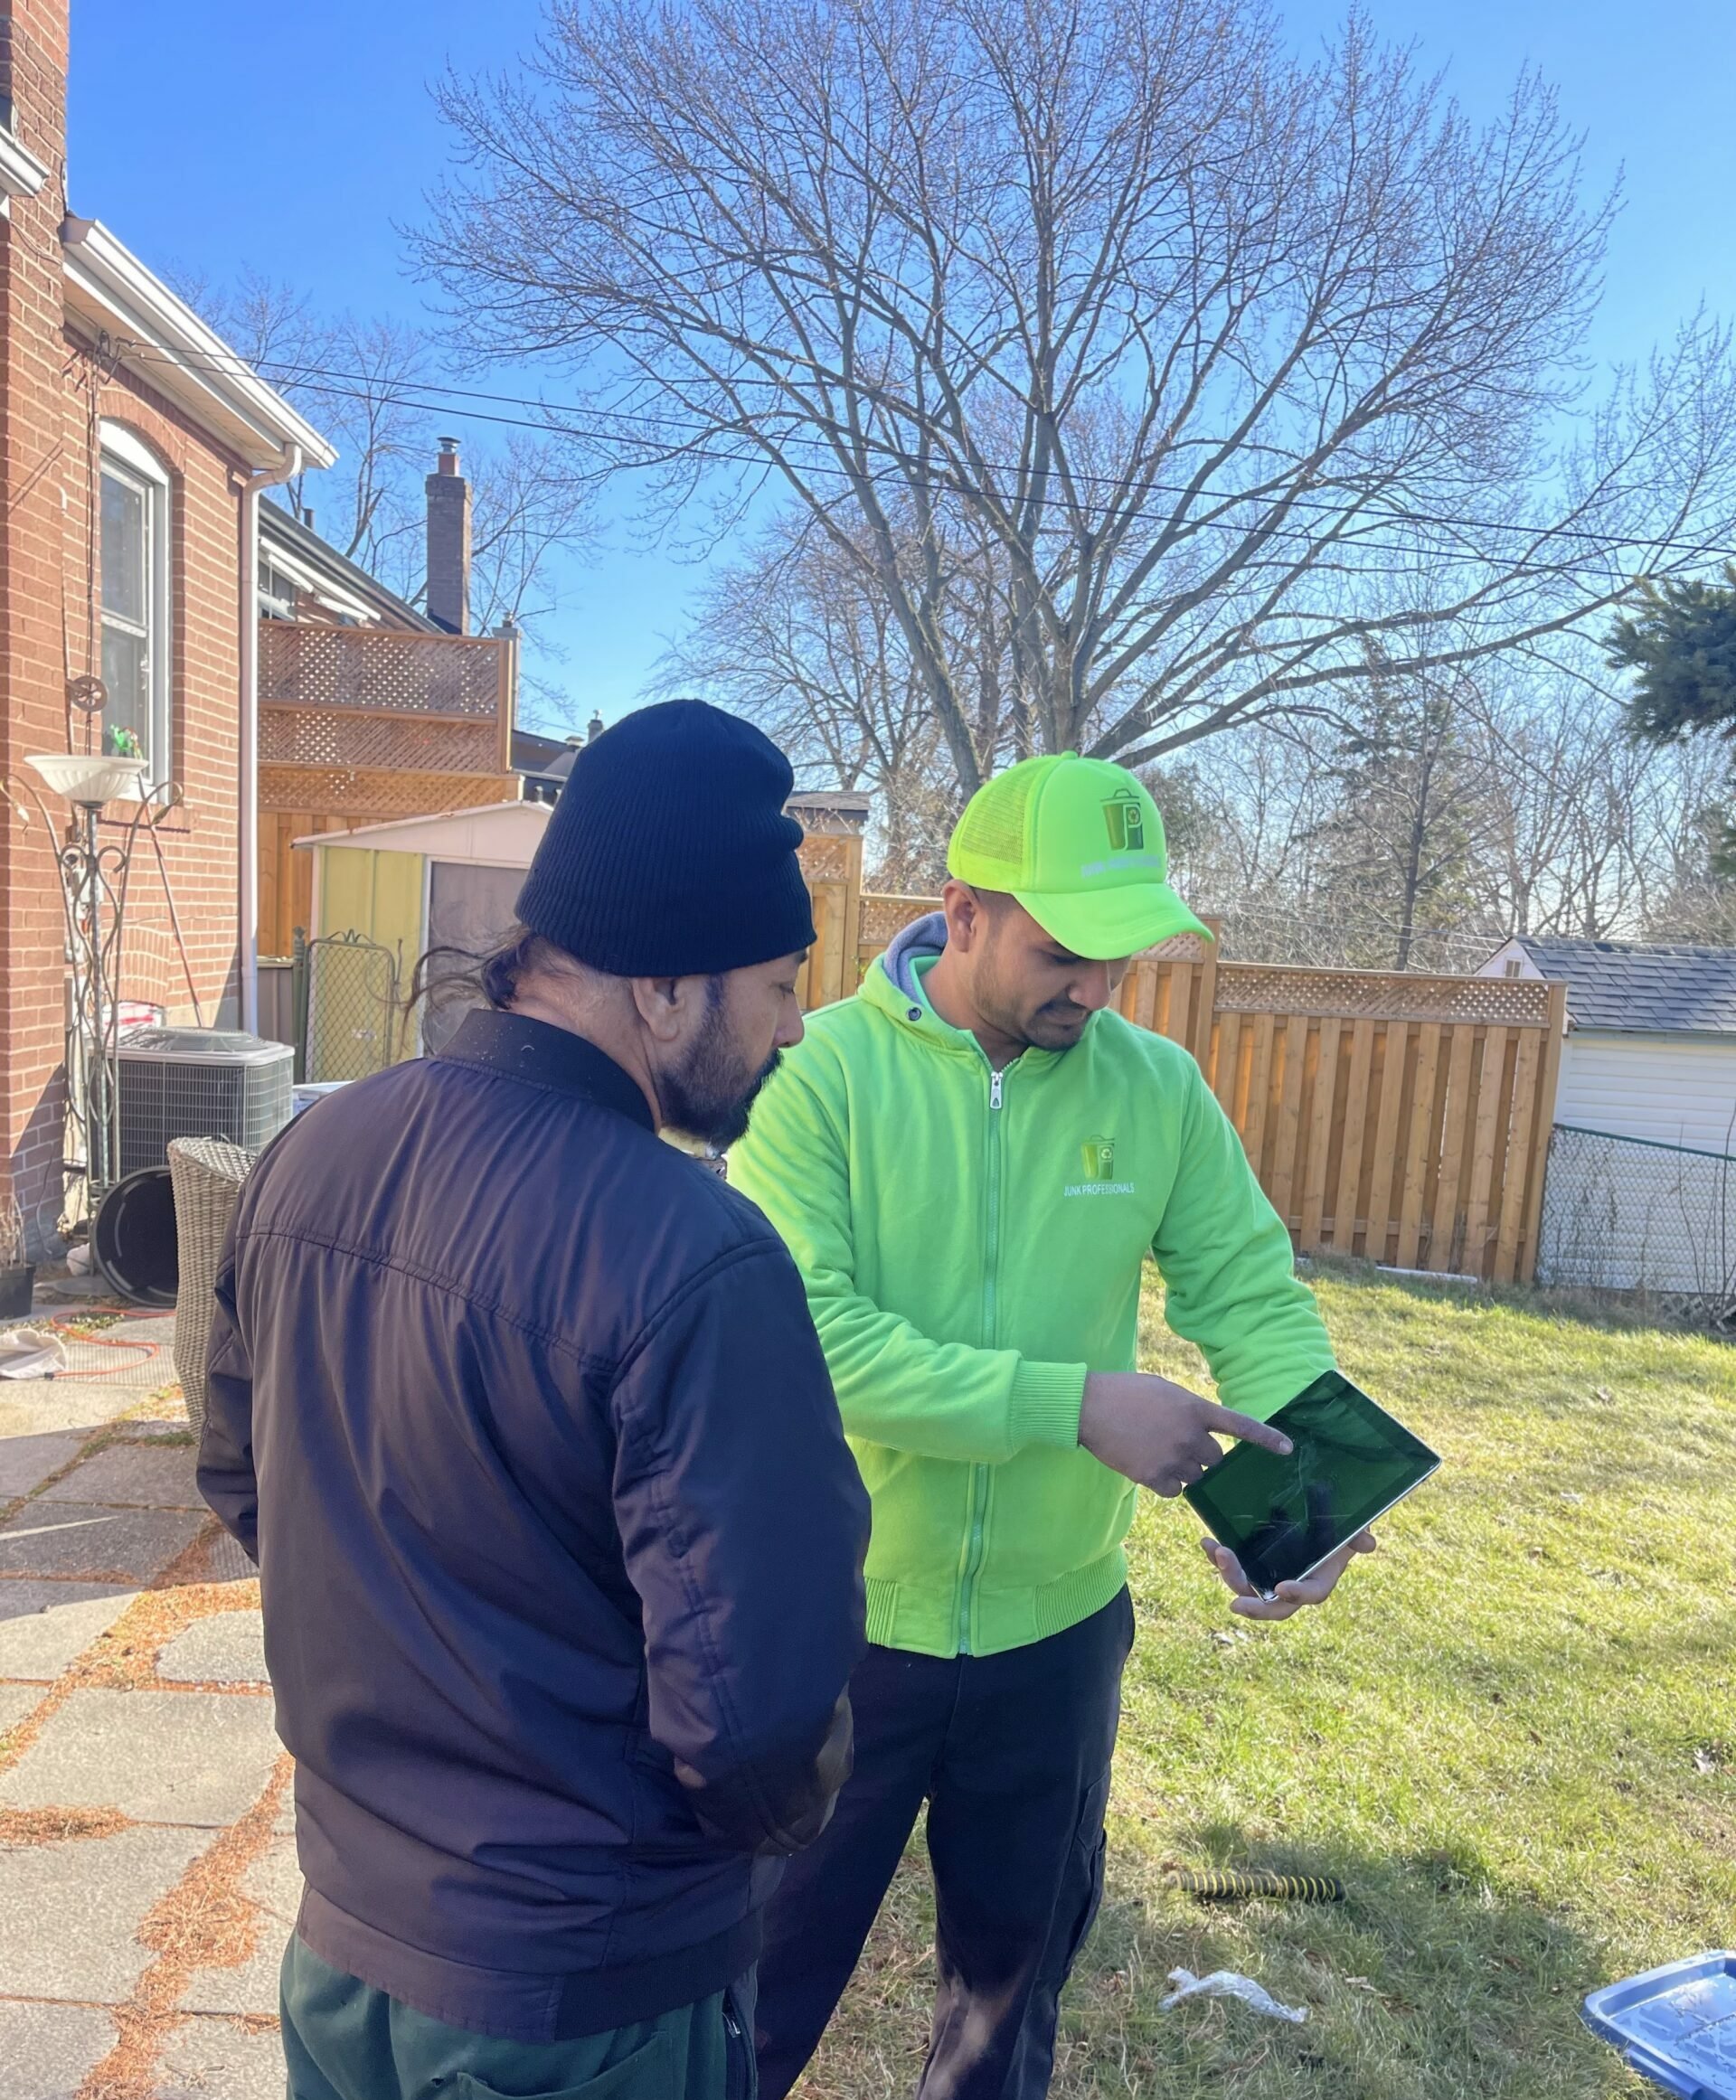 Junk professionals team member showing pricing on a tablet to customer for junk removal service